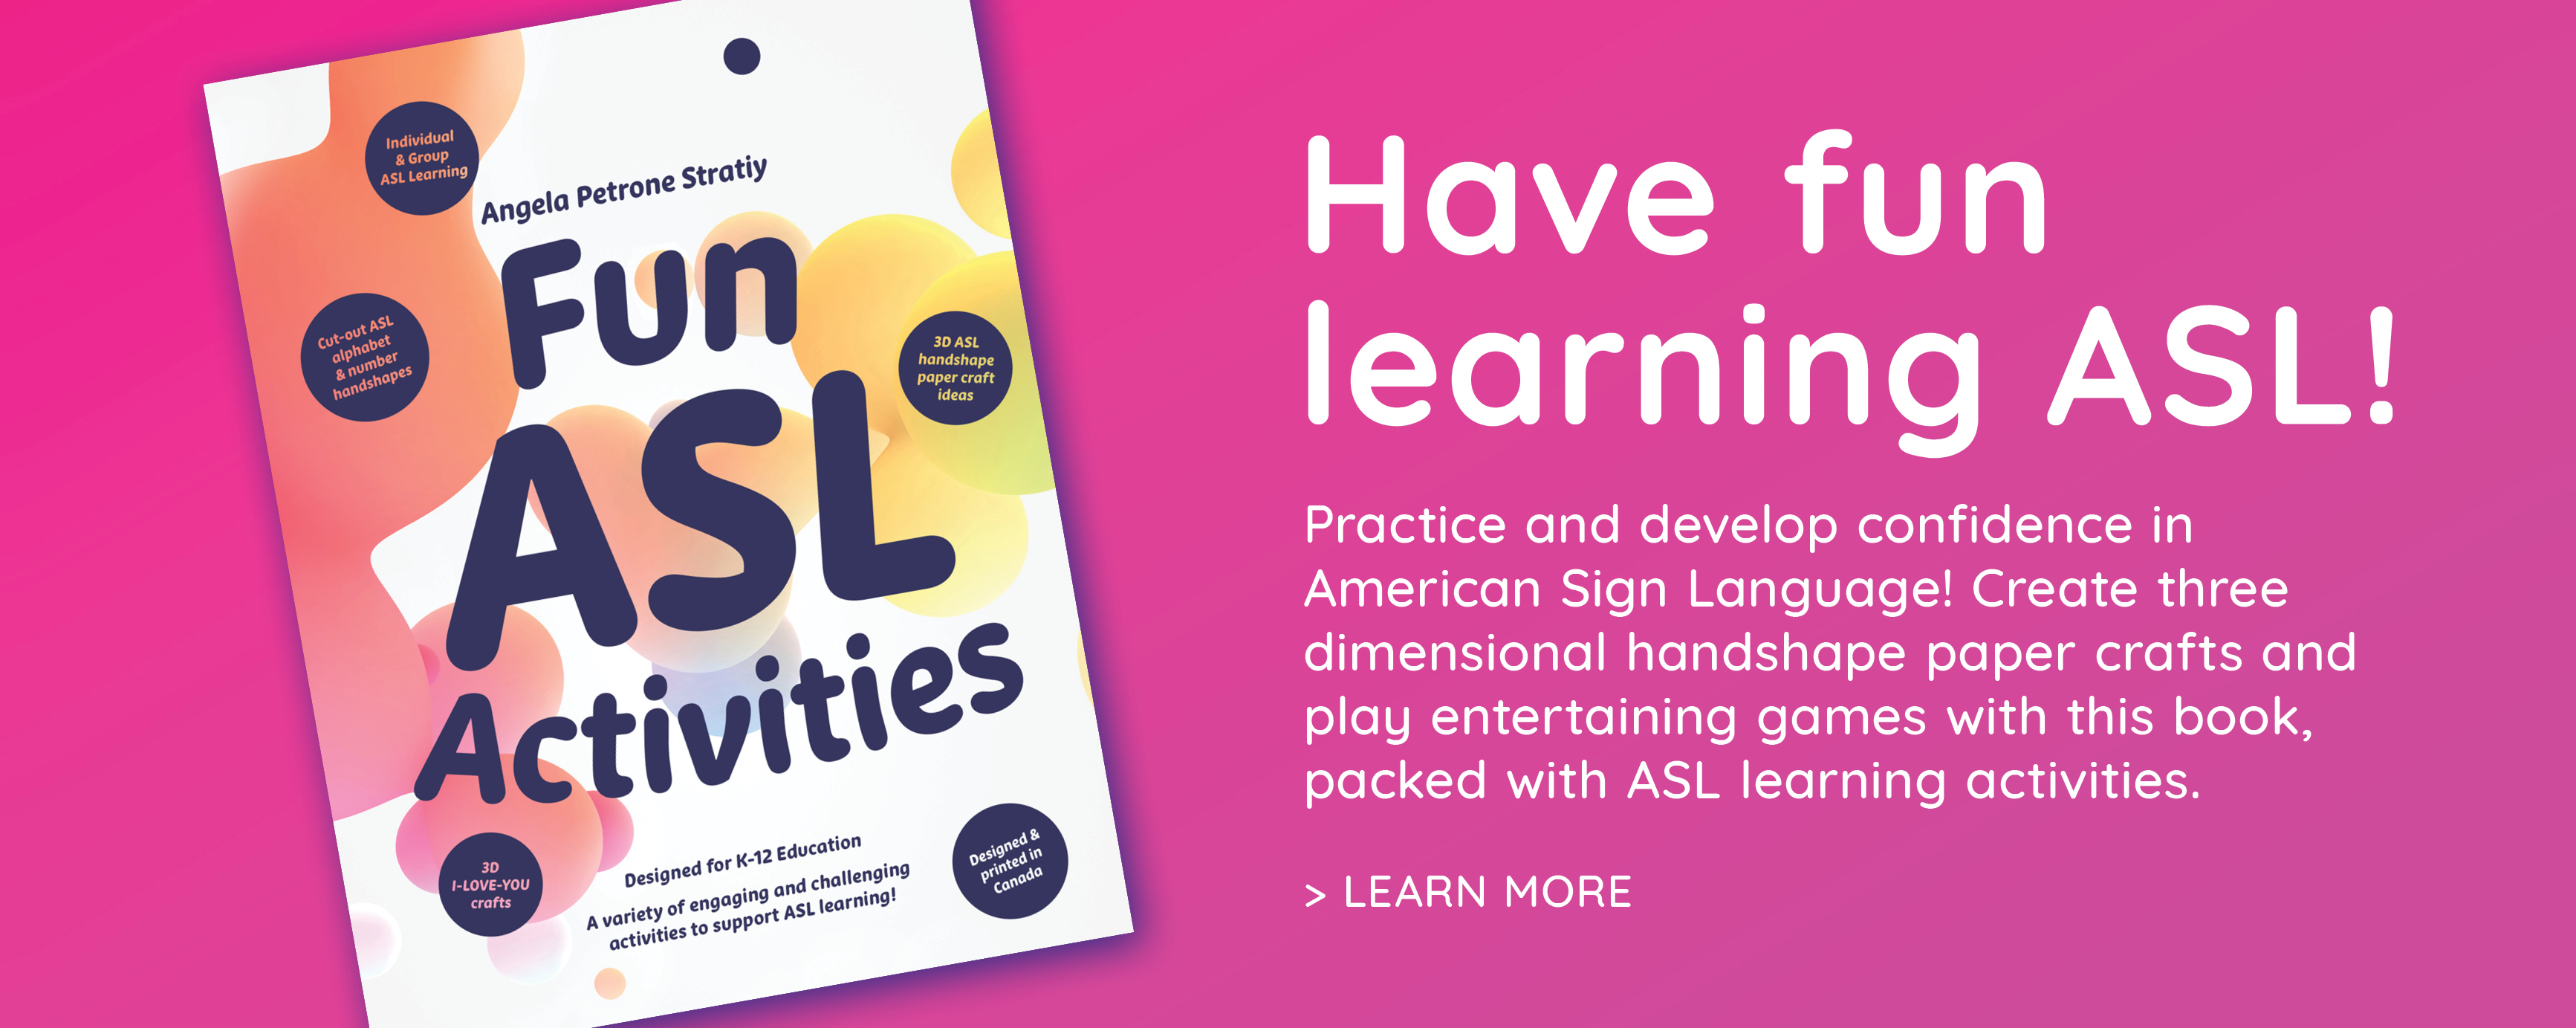 Have fun learning ASL!